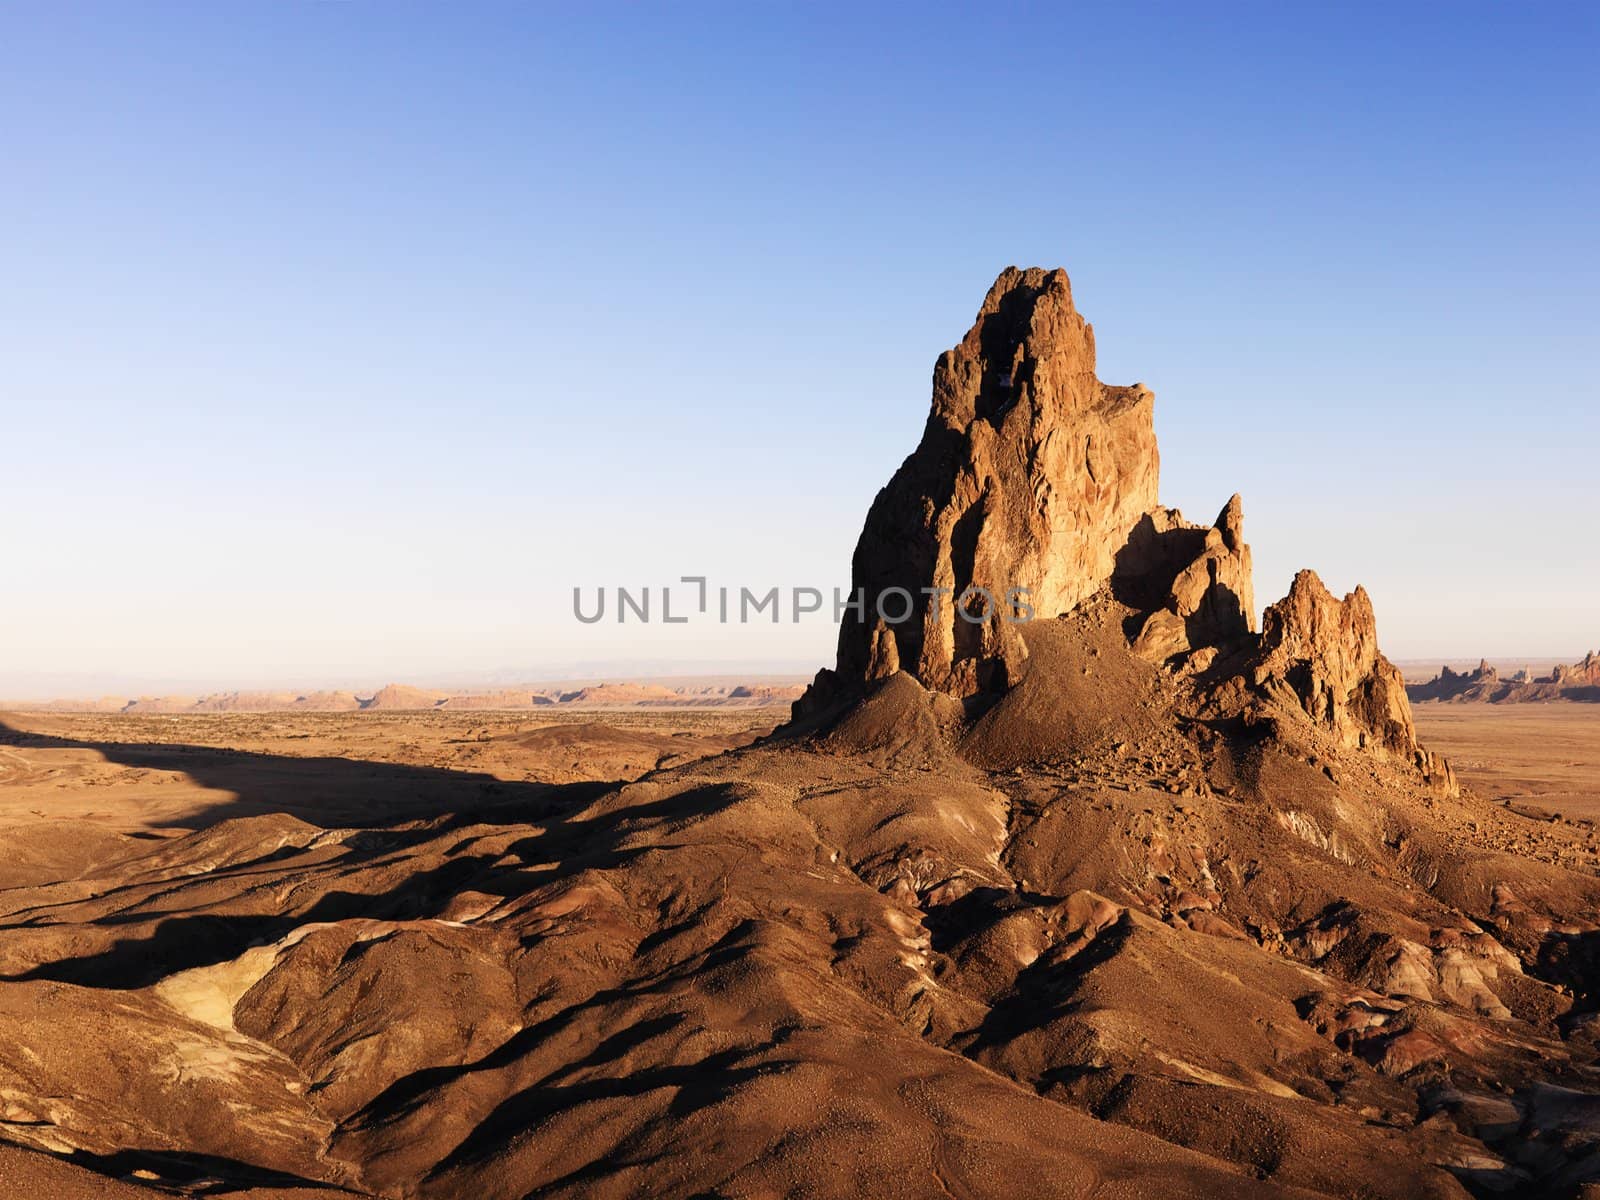 Scenic landscape of rock formations in Arizona, United States.